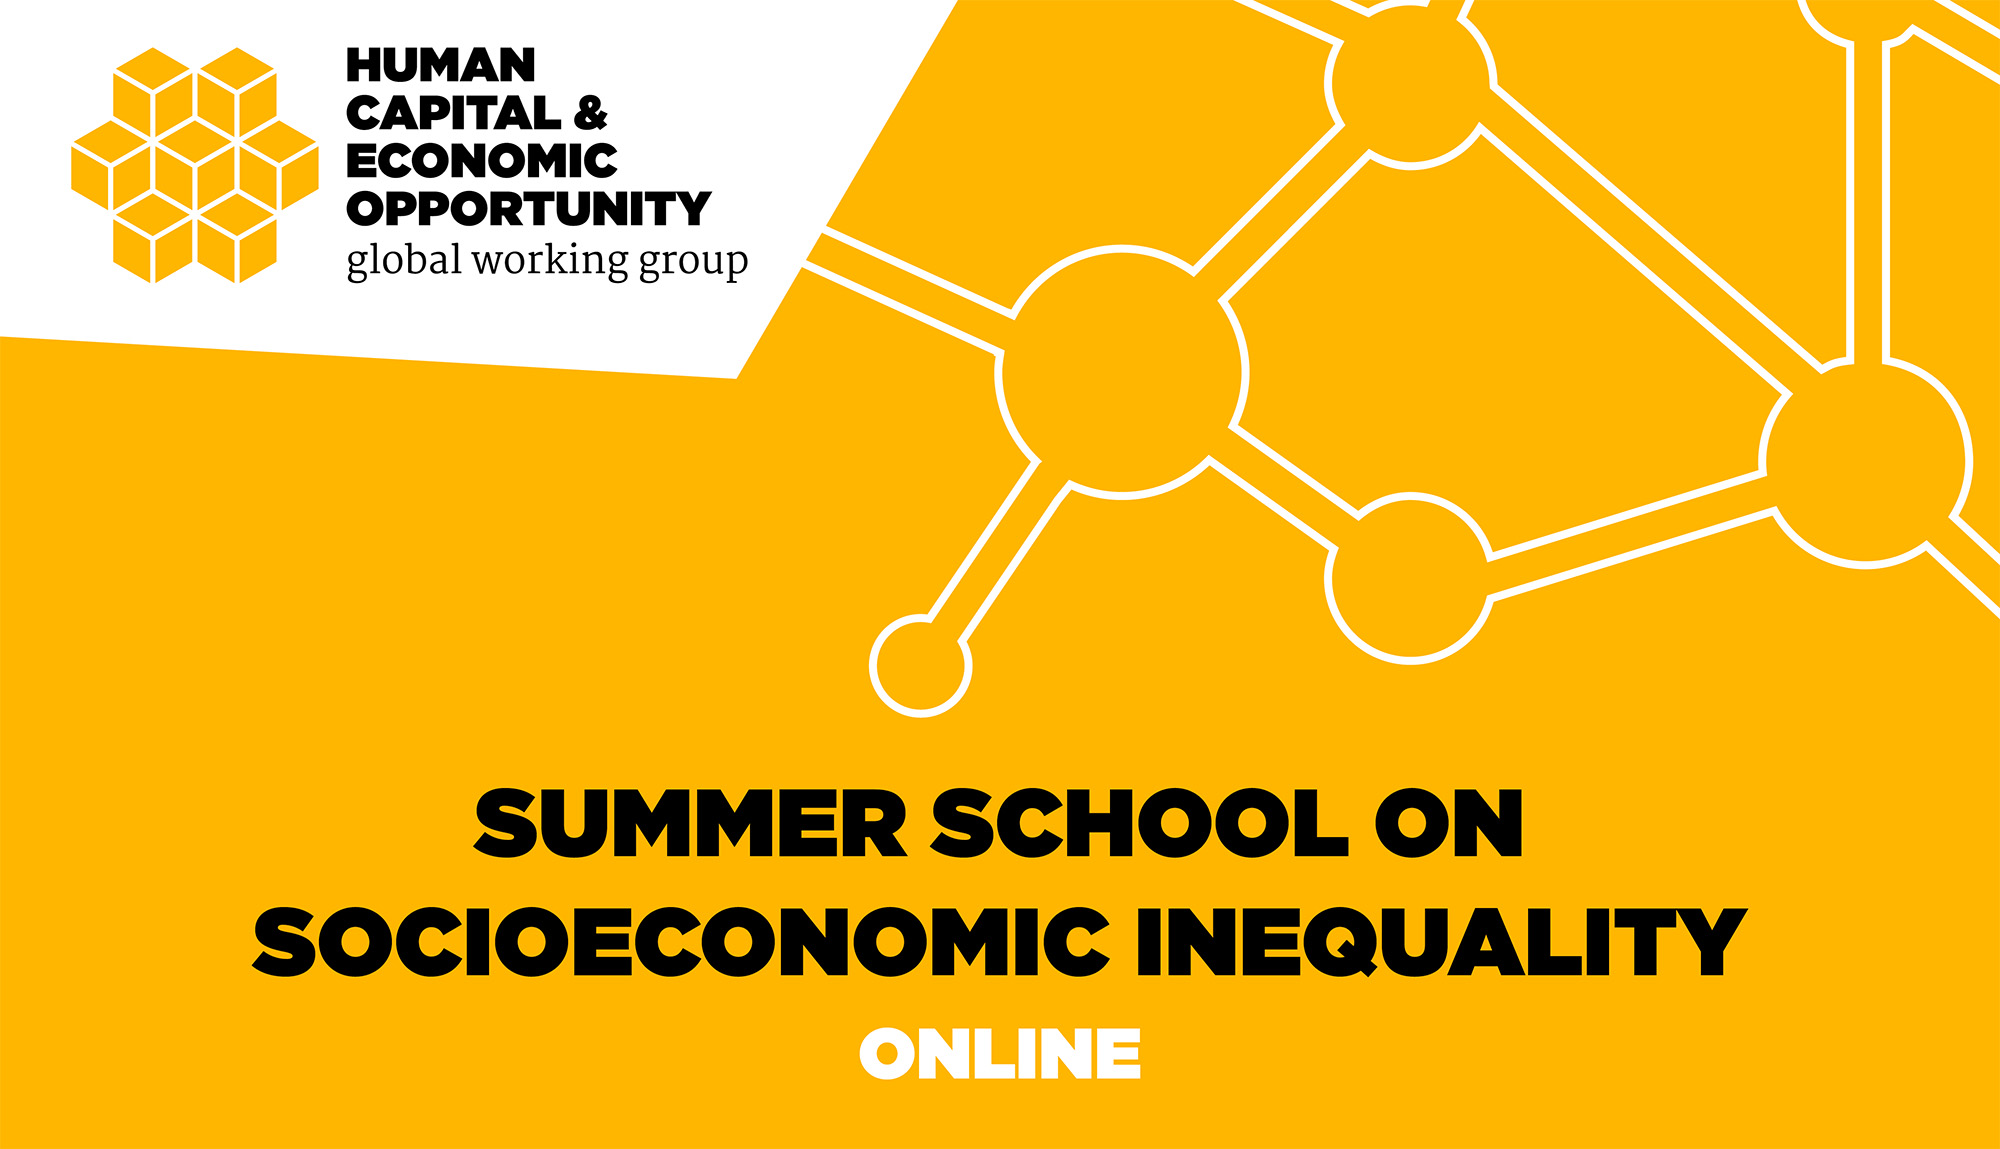 Graphic reads "Summer School on Socioeconomic Inequality Online" with white outline of molecular structure in upper right corner with yellow background.